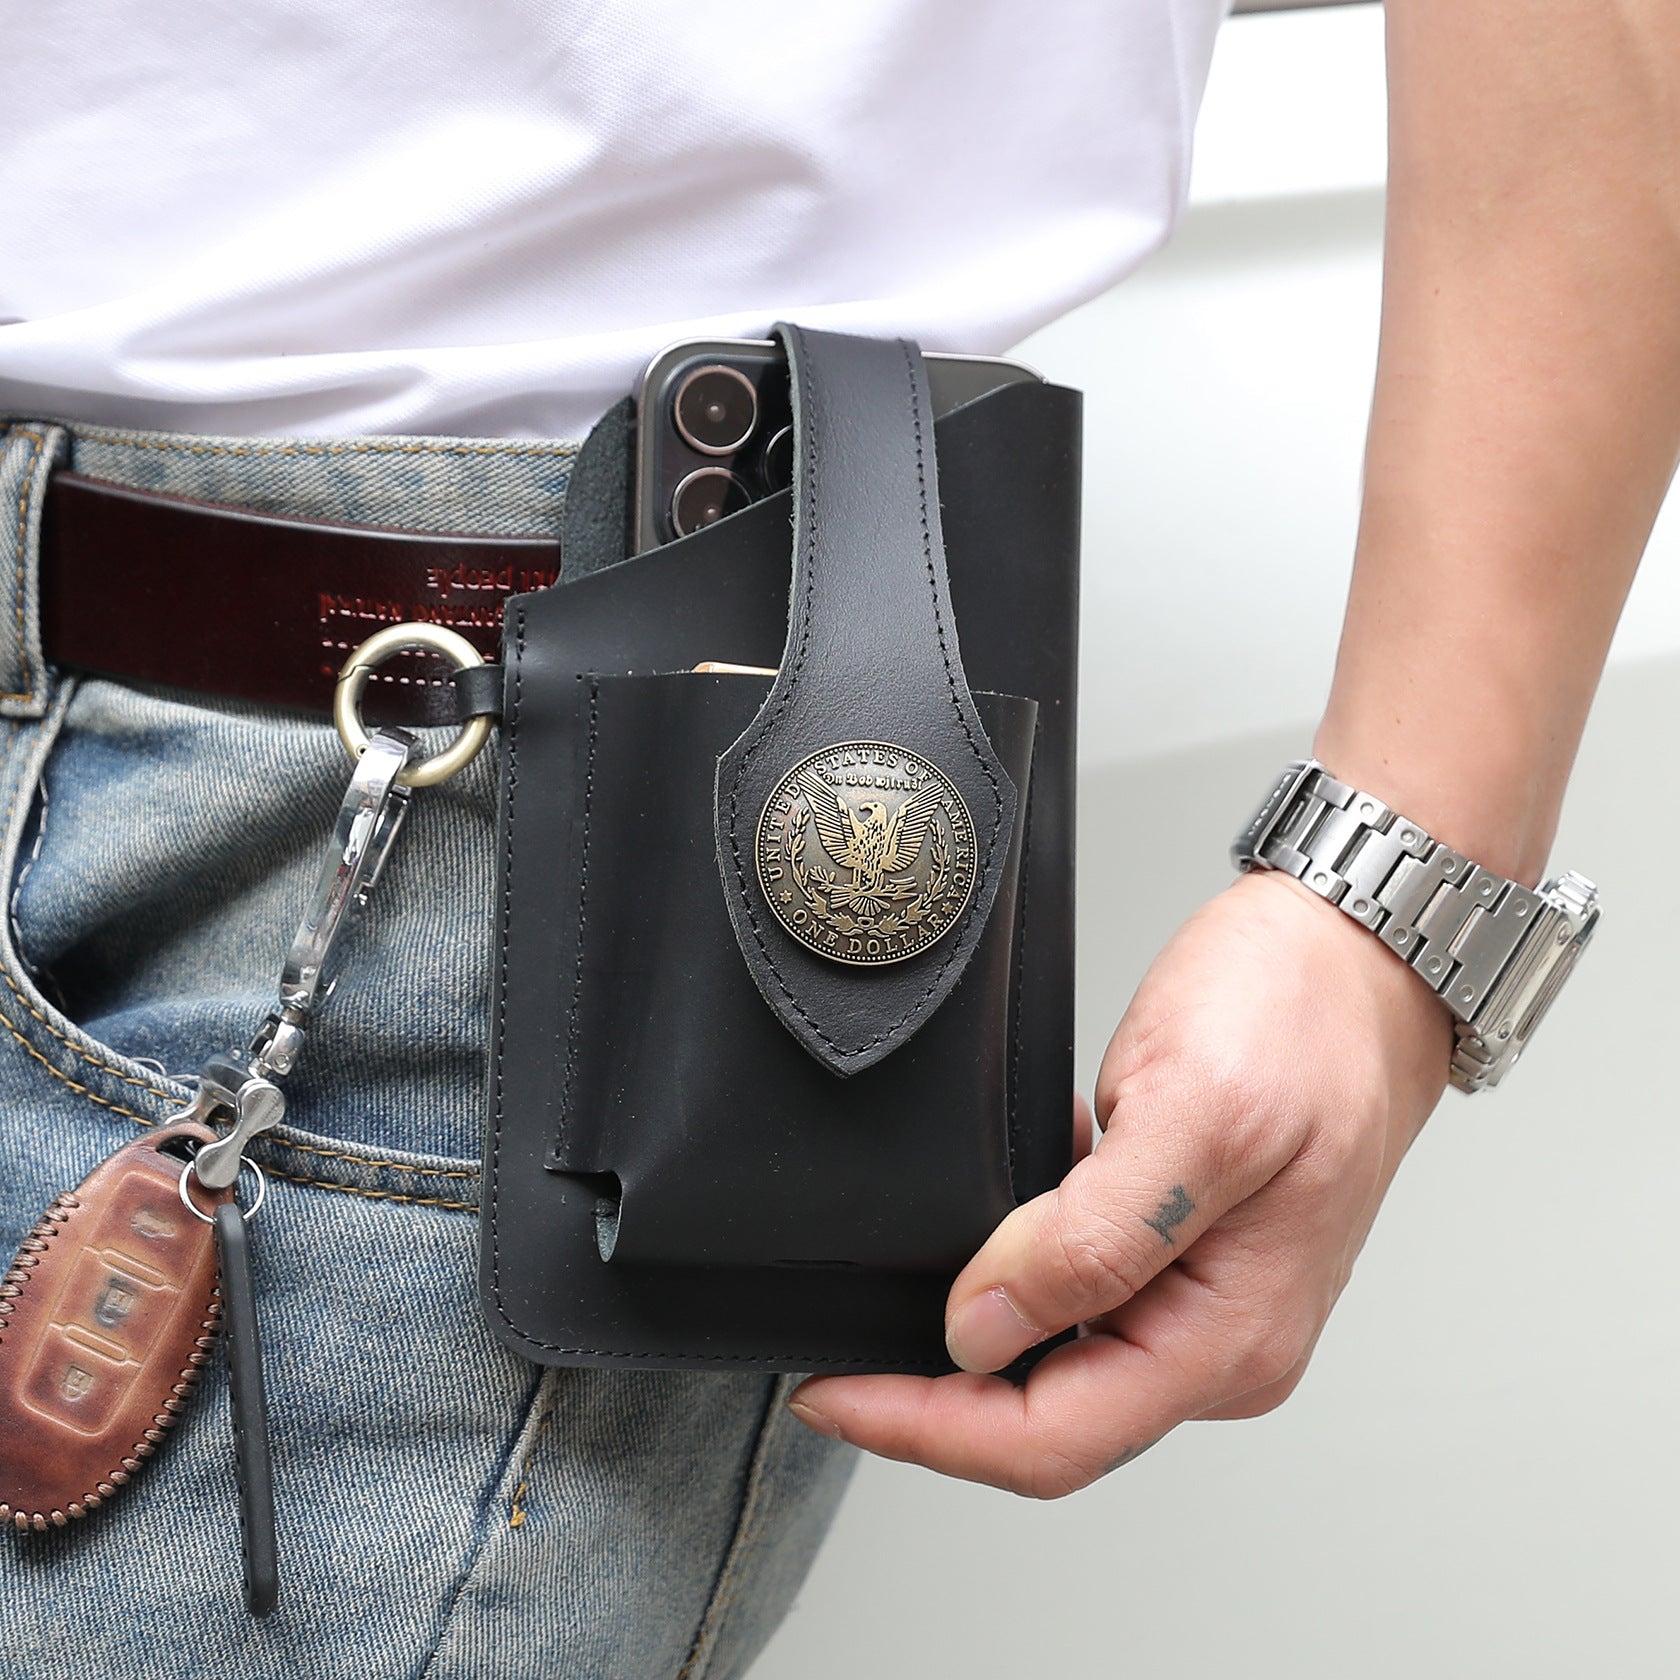 BeltBag - The Multifunctional Leather Phone Bag